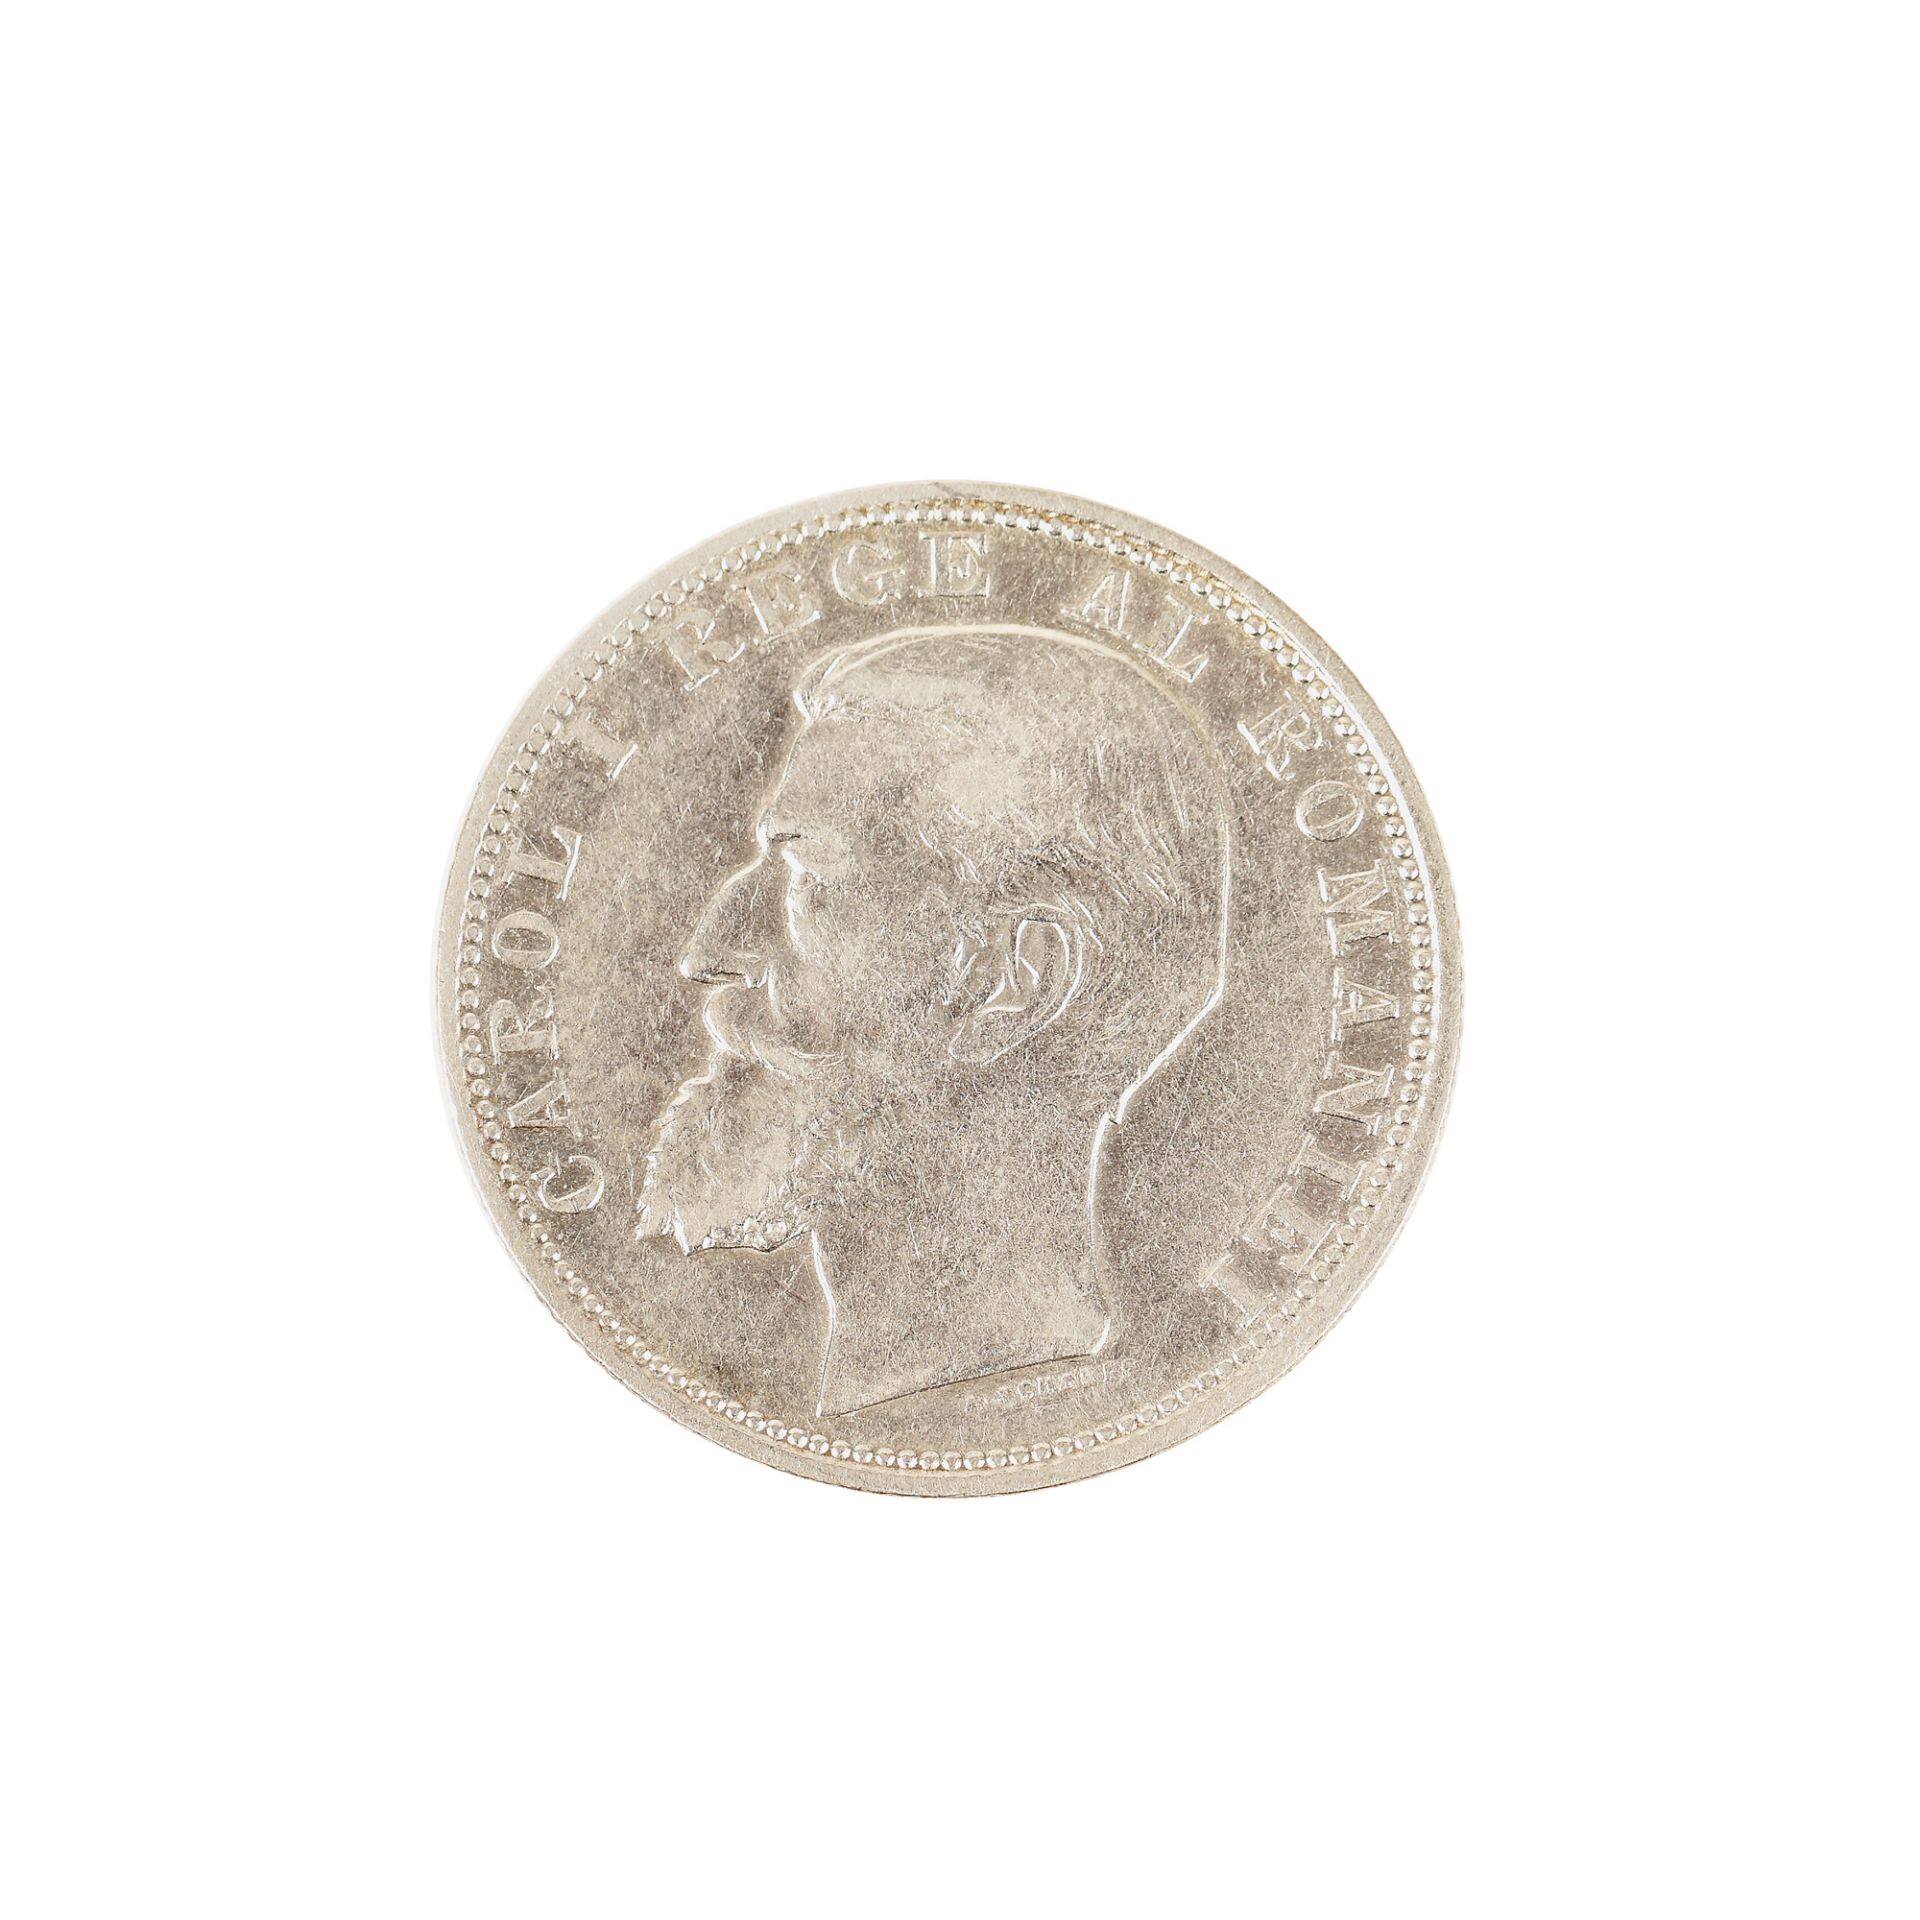 2 Lei 1900 coin, silver - Image 2 of 3